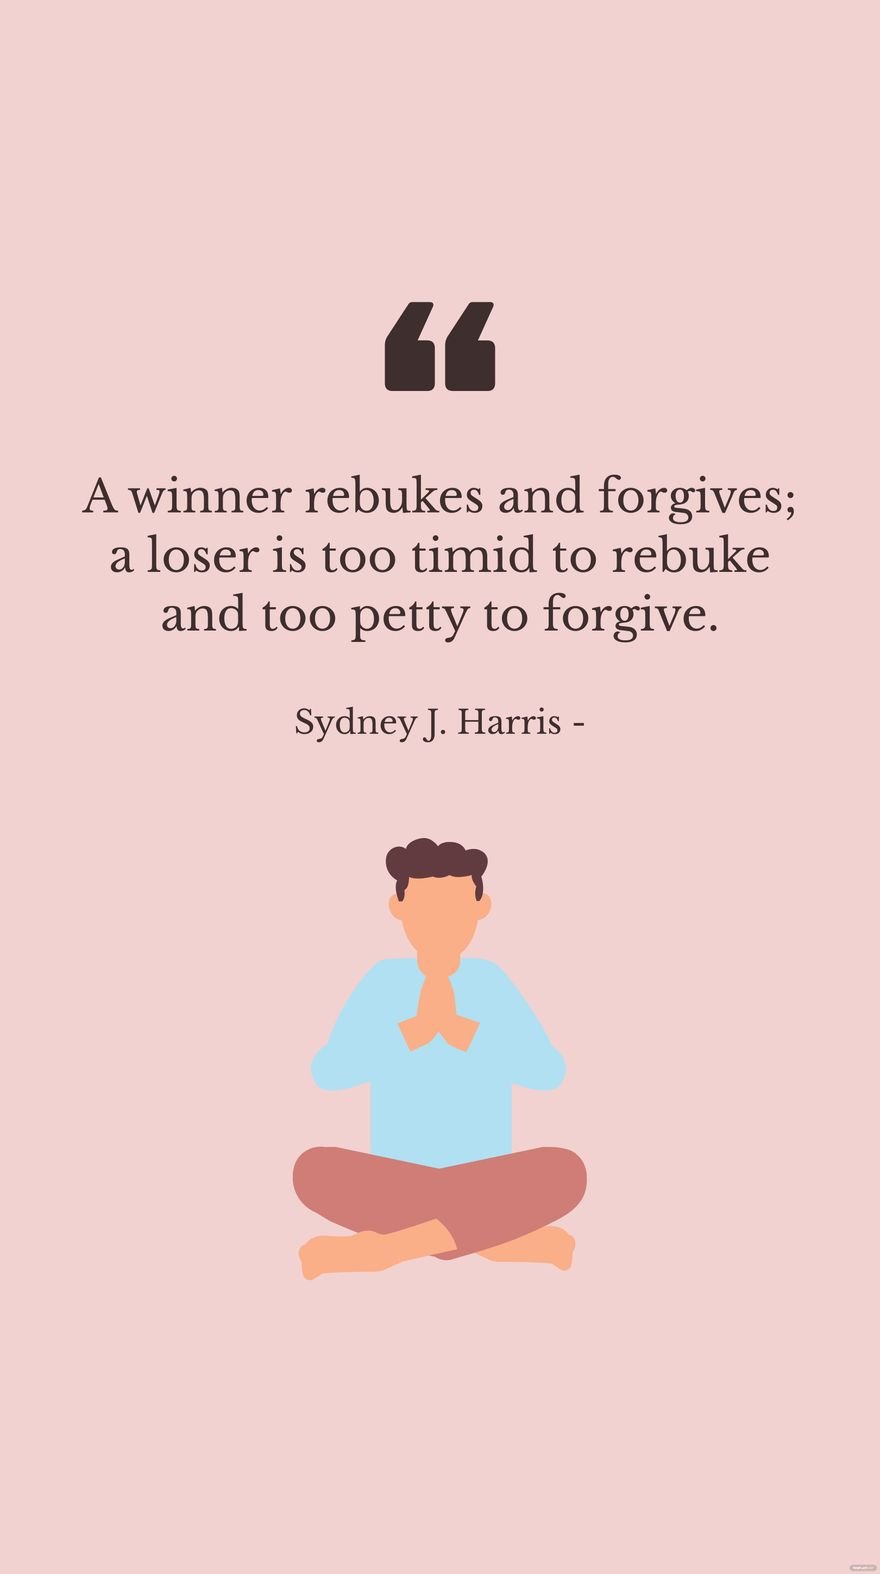 Free Sydney J. Harris - A winner rebukes and forgives; a loser is too timid to rebuke and too petty to forgive. in JPG